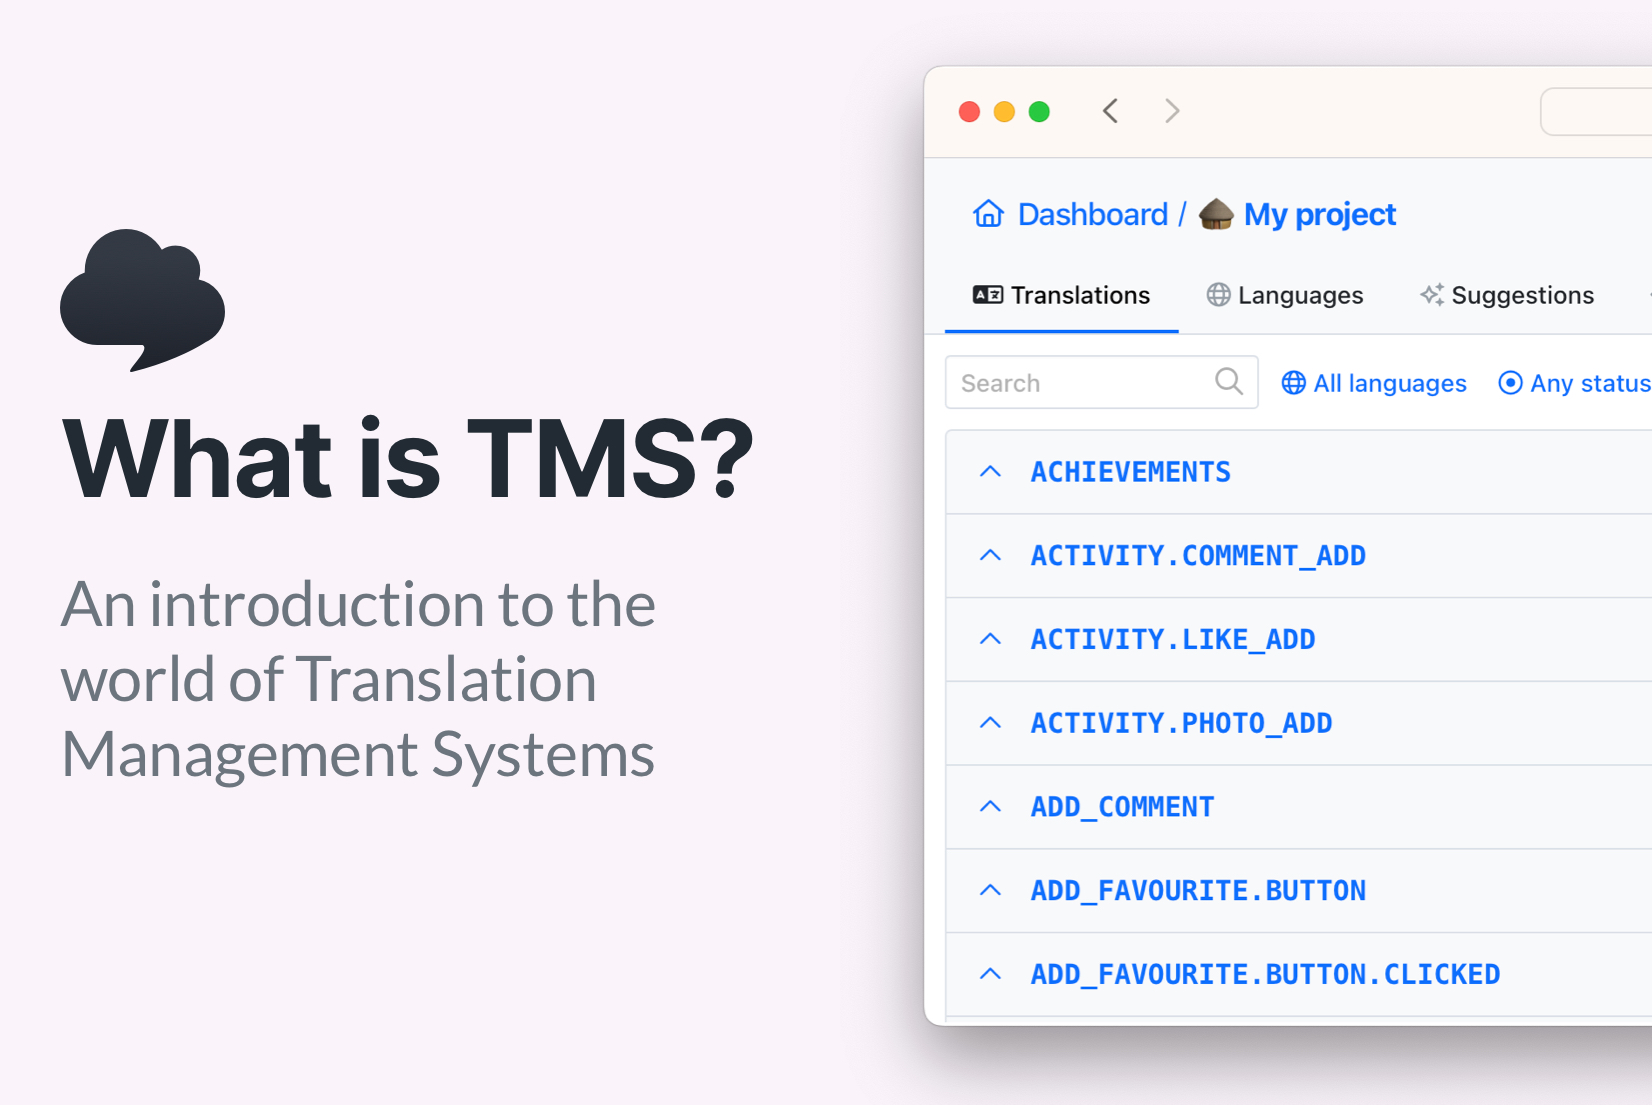 How to get started with a TMS: An introduction to SimpleLocalize